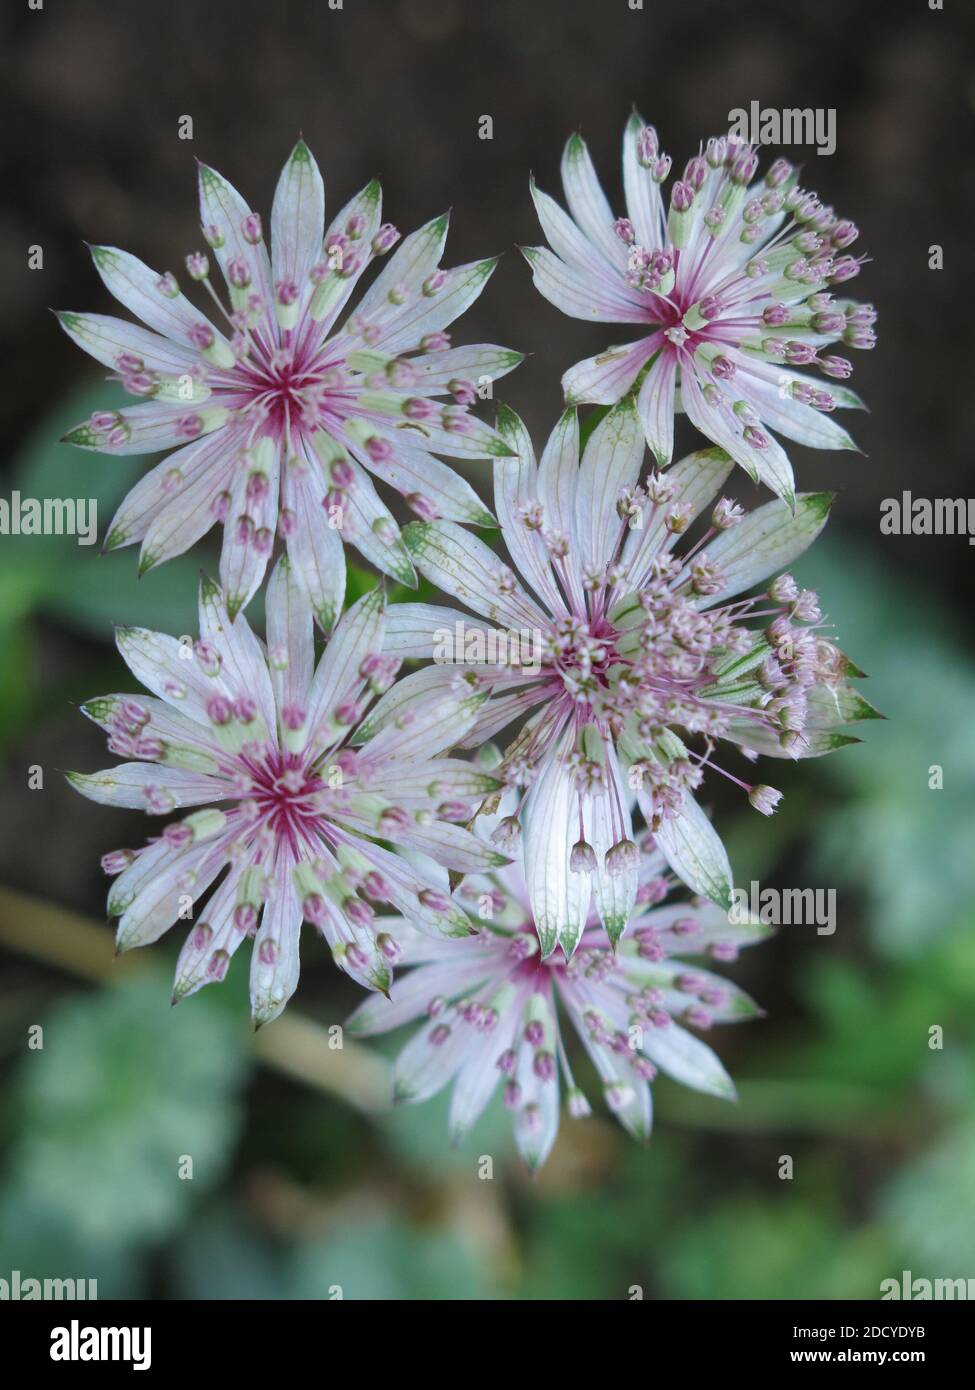 Close-up of a cluster of the dainty pink flowers of Astrantia, also known as Masterwort or Hattie's pincushion. Stock Photo